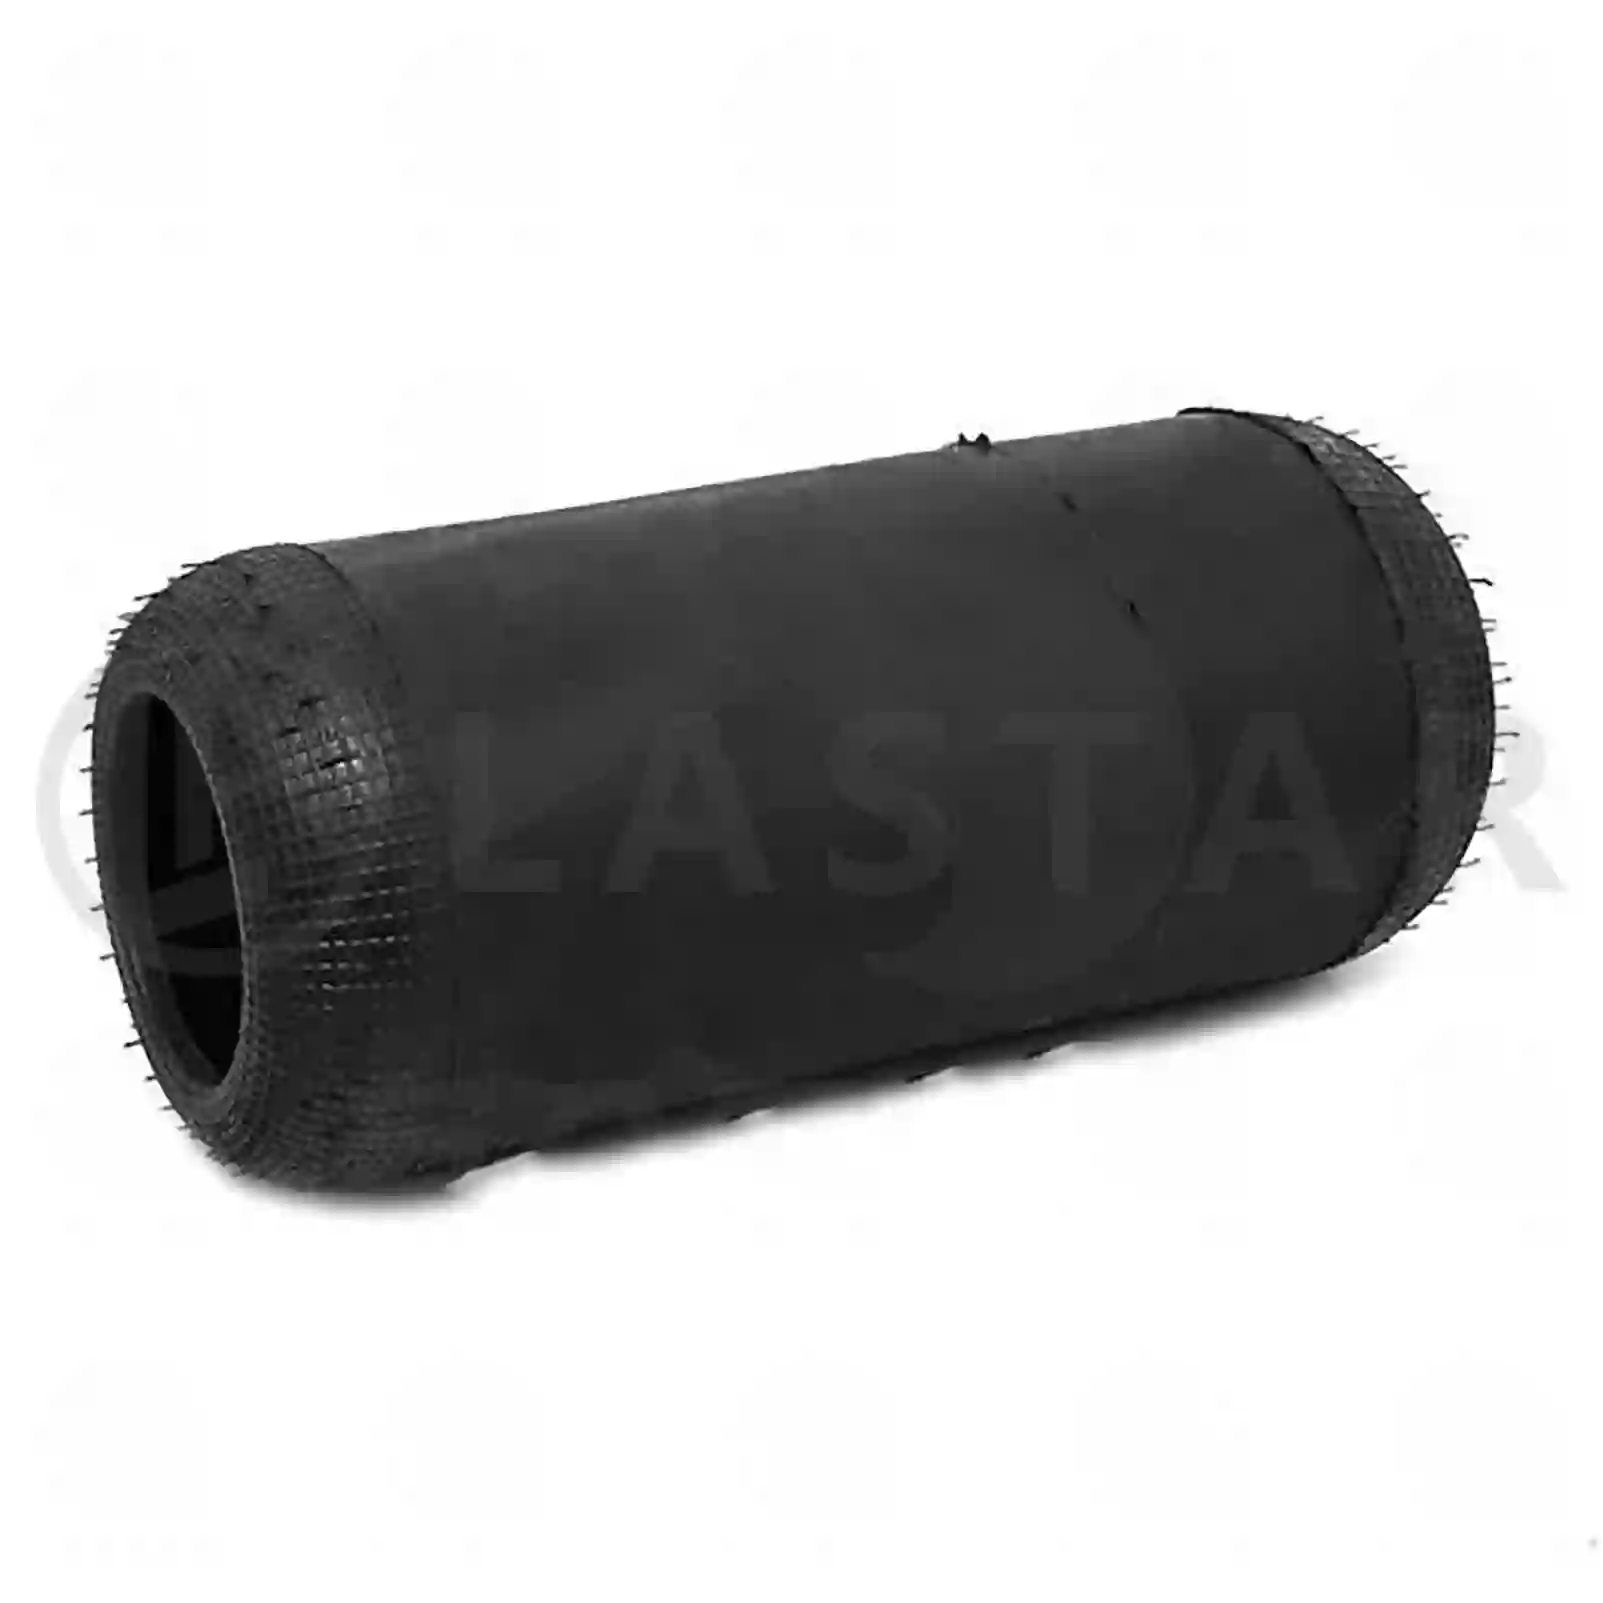 Air spring, without piston, 77728682, 500055245, 500319479, ZG40836-0008 ||  77728682 Lastar Spare Part | Truck Spare Parts, Auotomotive Spare Parts Air spring, without piston, 77728682, 500055245, 500319479, ZG40836-0008 ||  77728682 Lastar Spare Part | Truck Spare Parts, Auotomotive Spare Parts